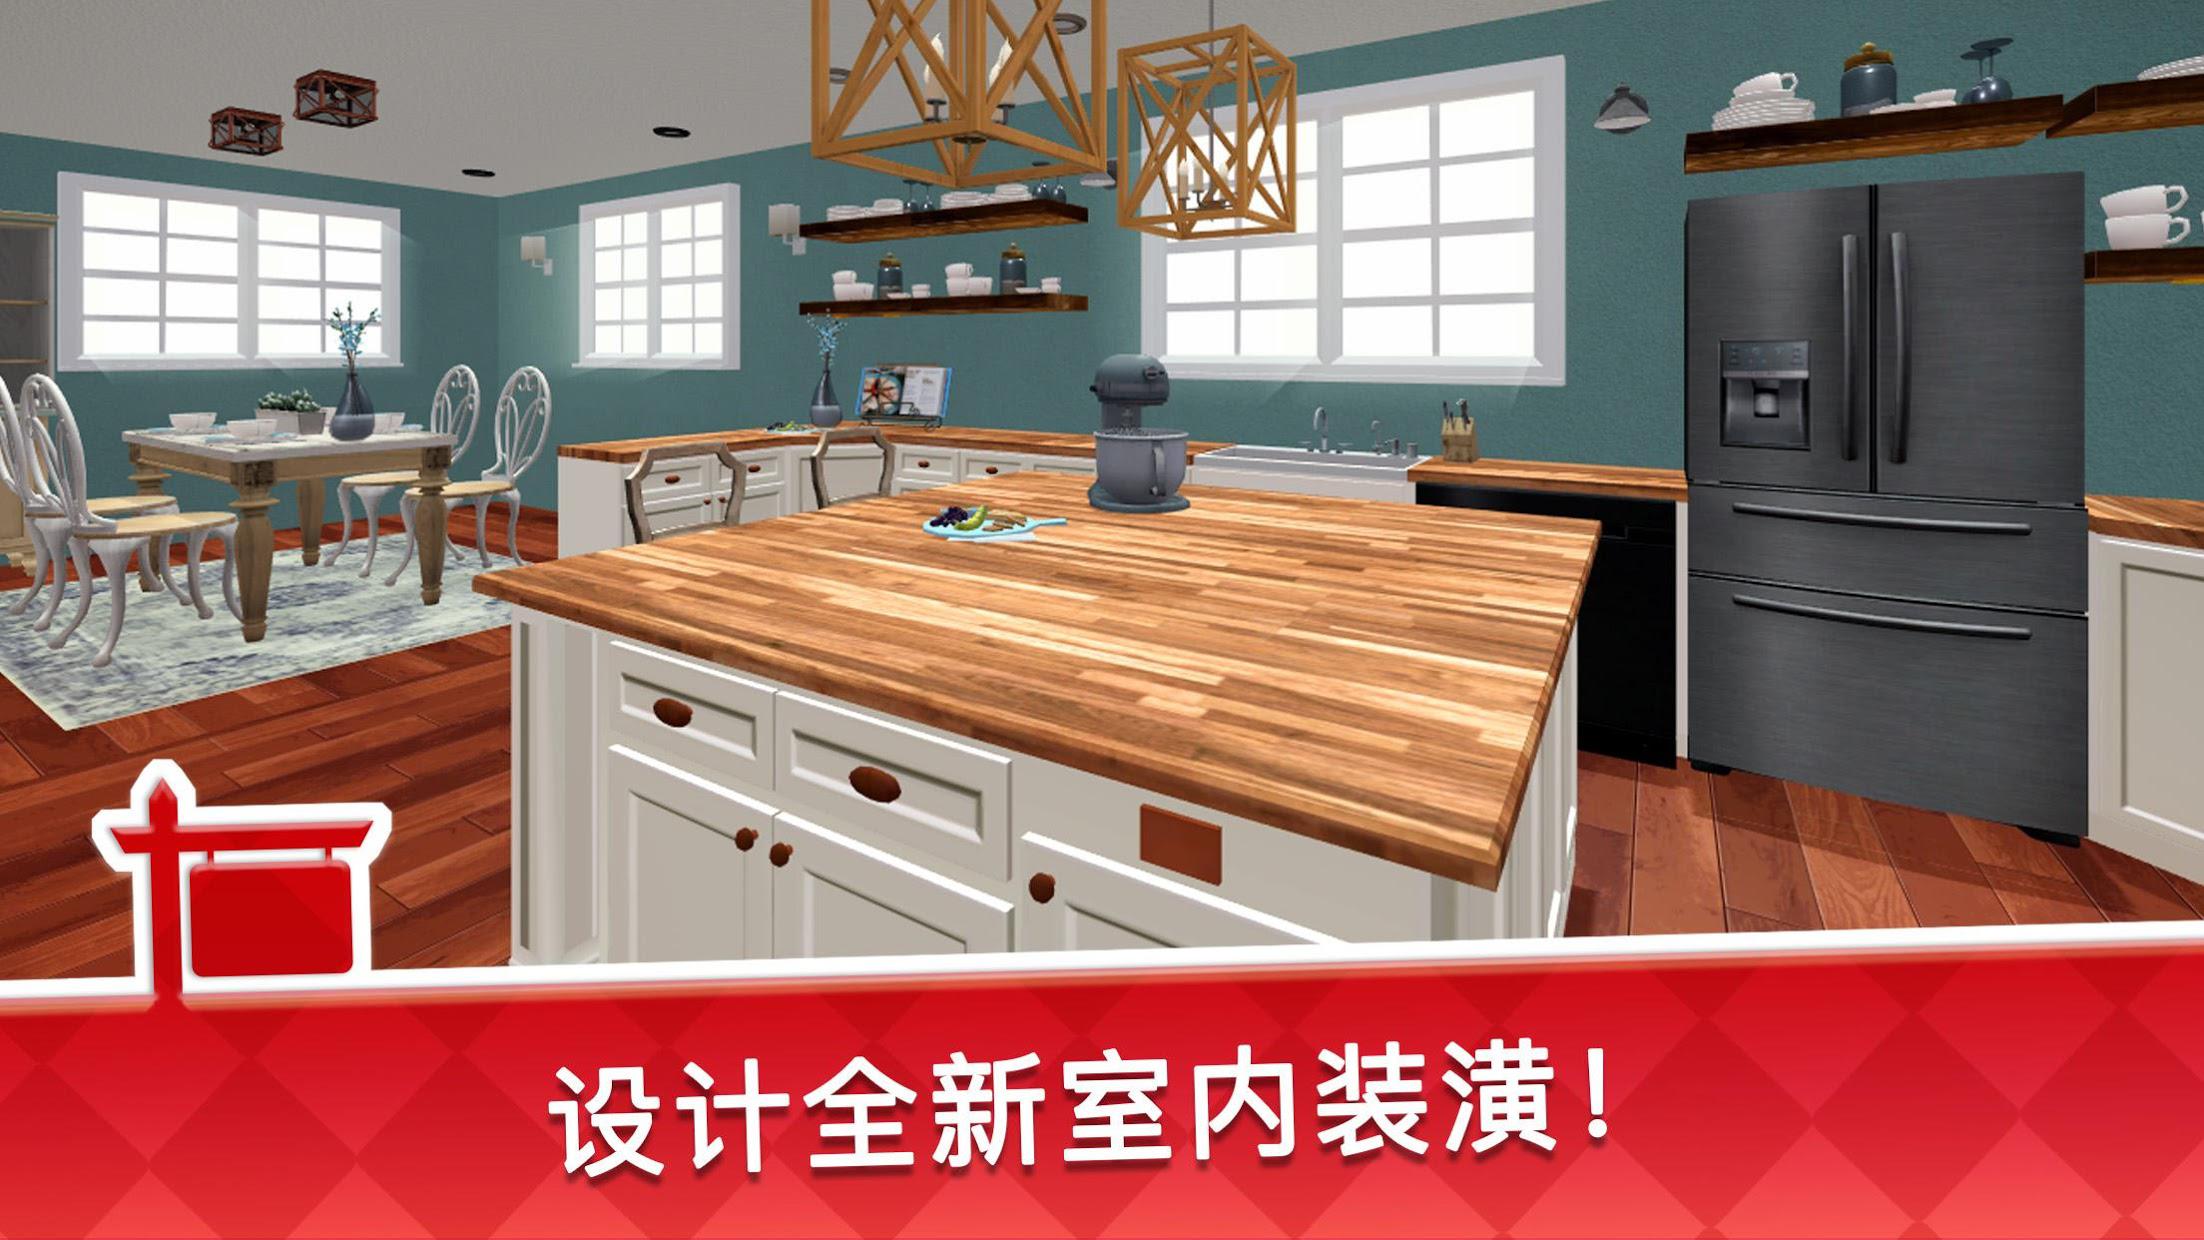 House Flip with Chip and Jo_截图_3